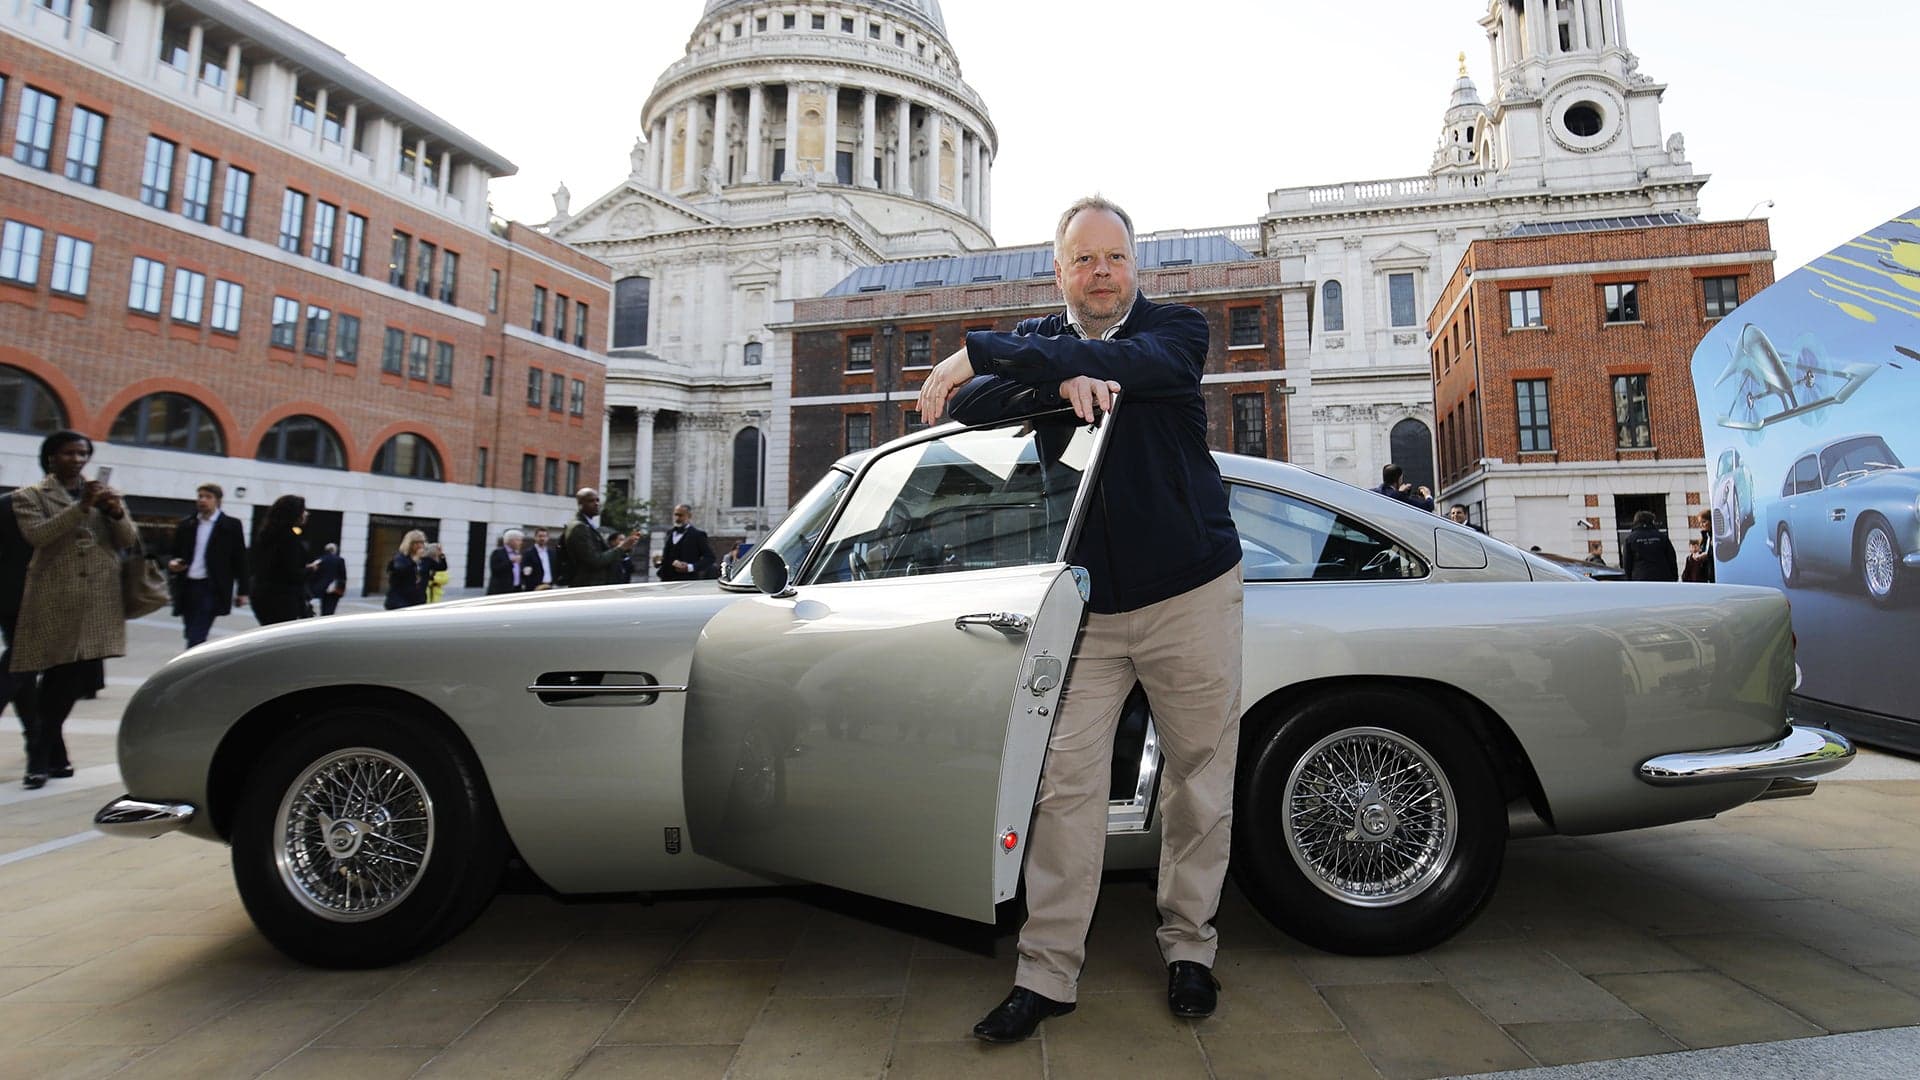 The Drive Interview: Aston Martin CEO Dr. Andy Palmer